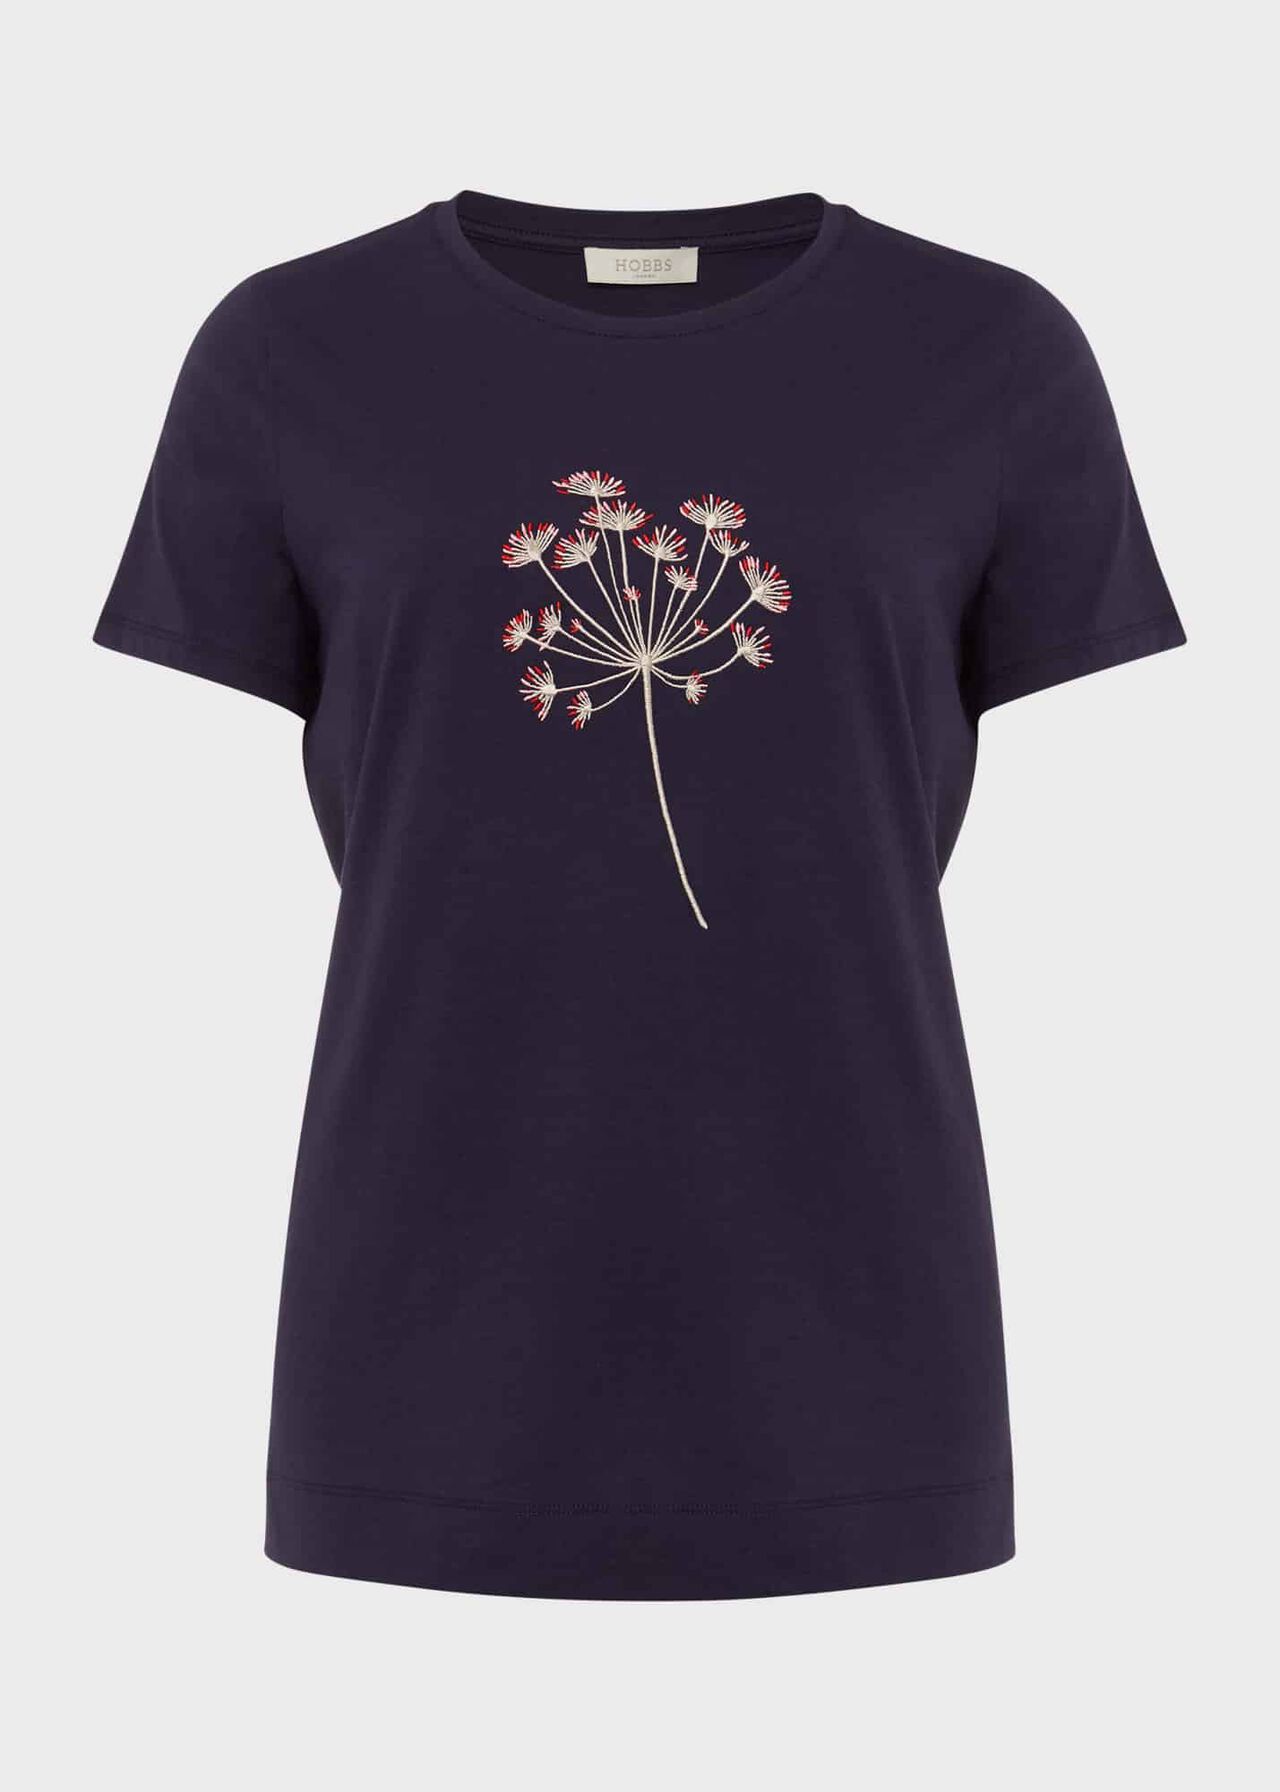 Jamie Embroided T-Shirt, Cow Parsley, hi-res